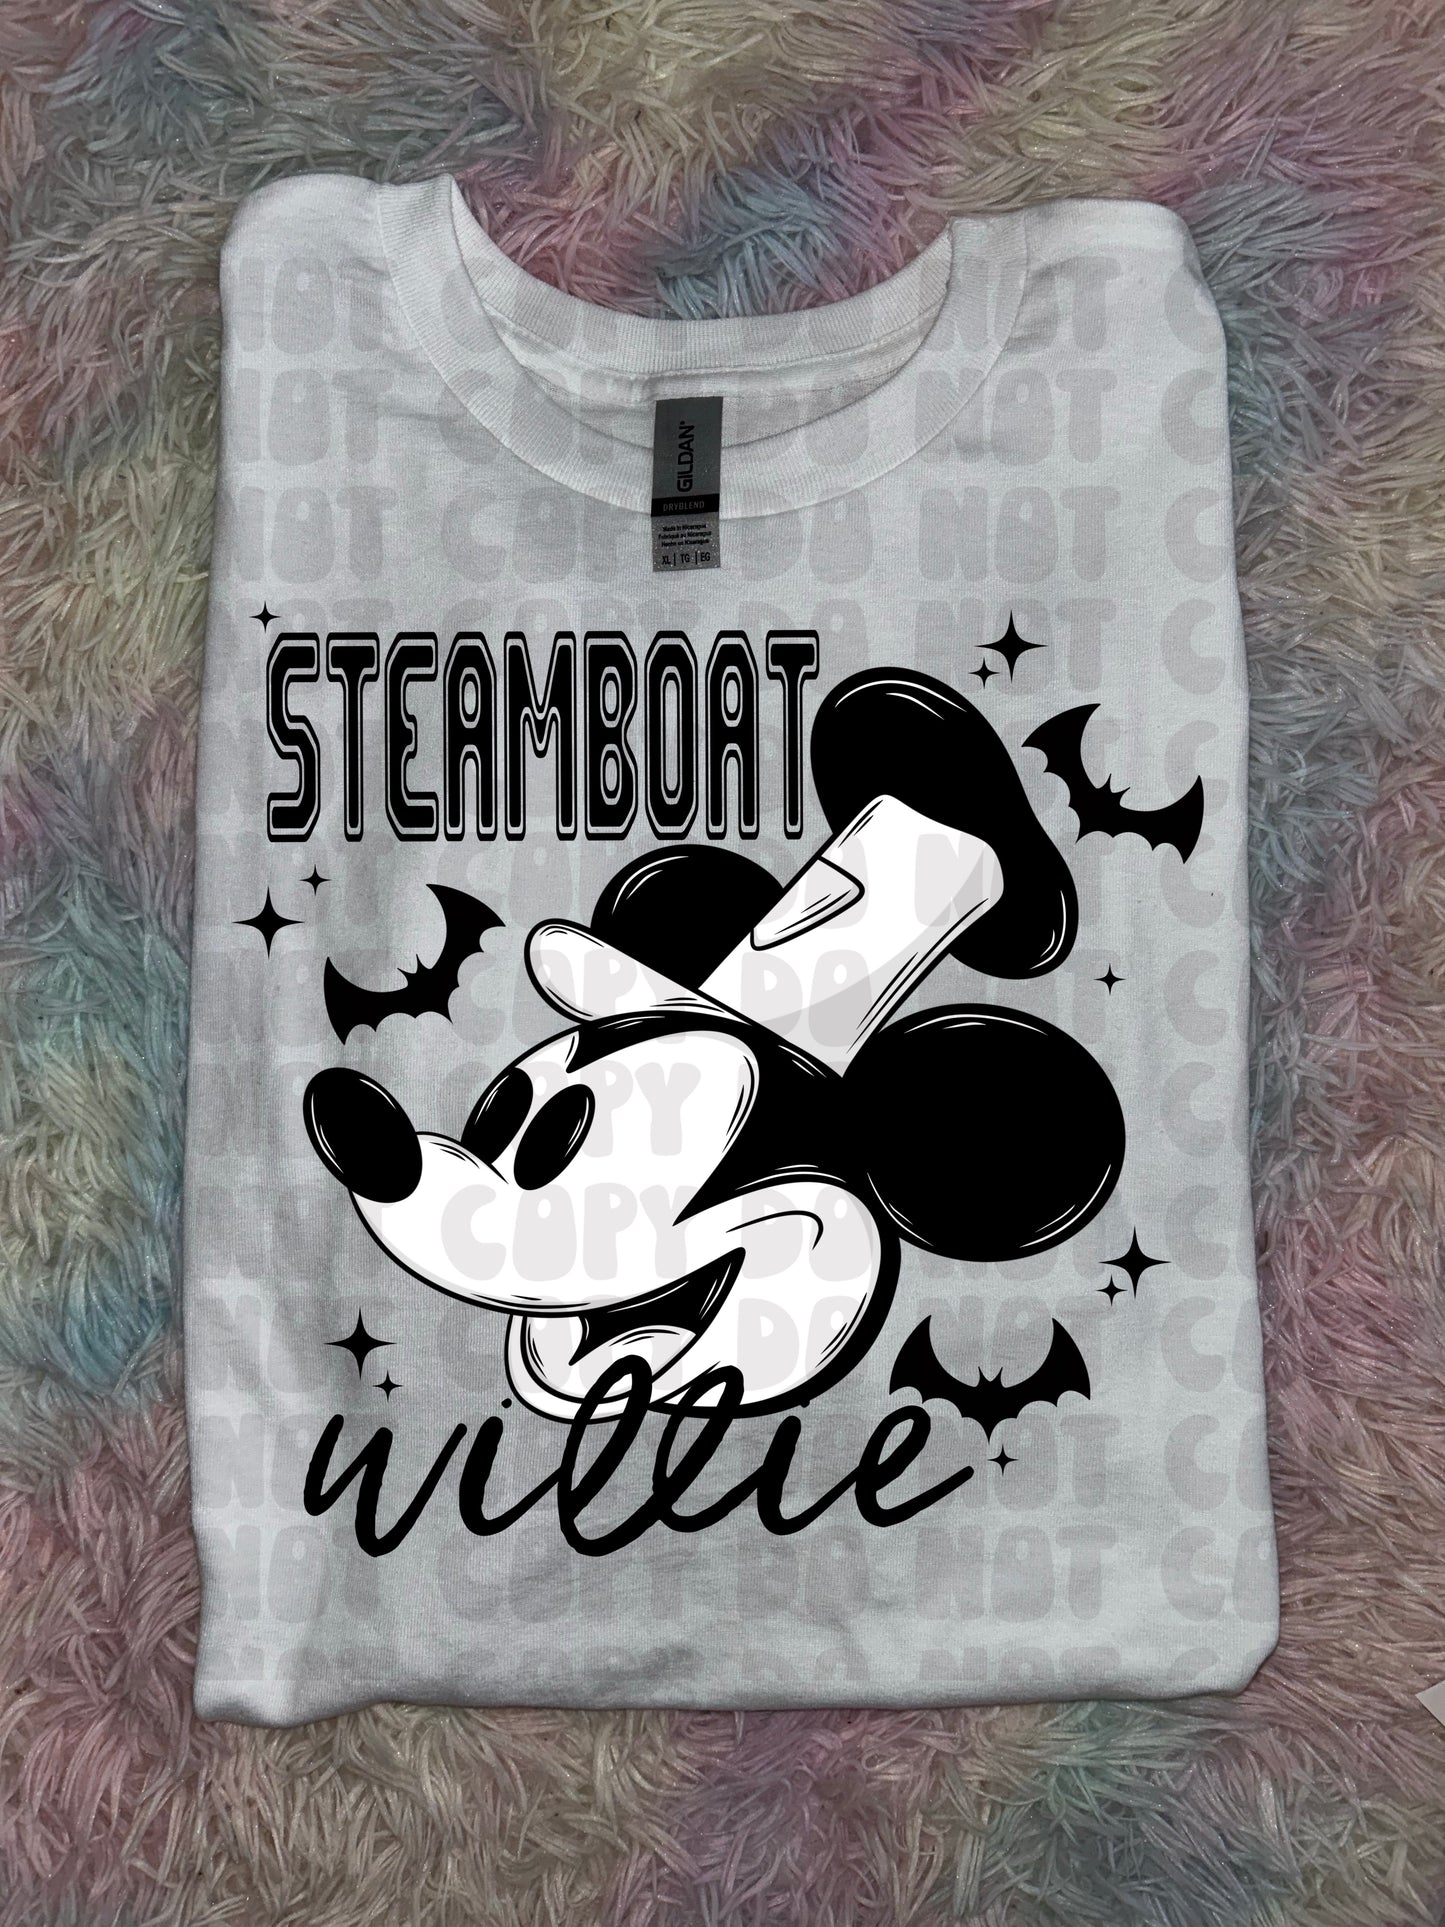 Steamboat Willie PREORDER